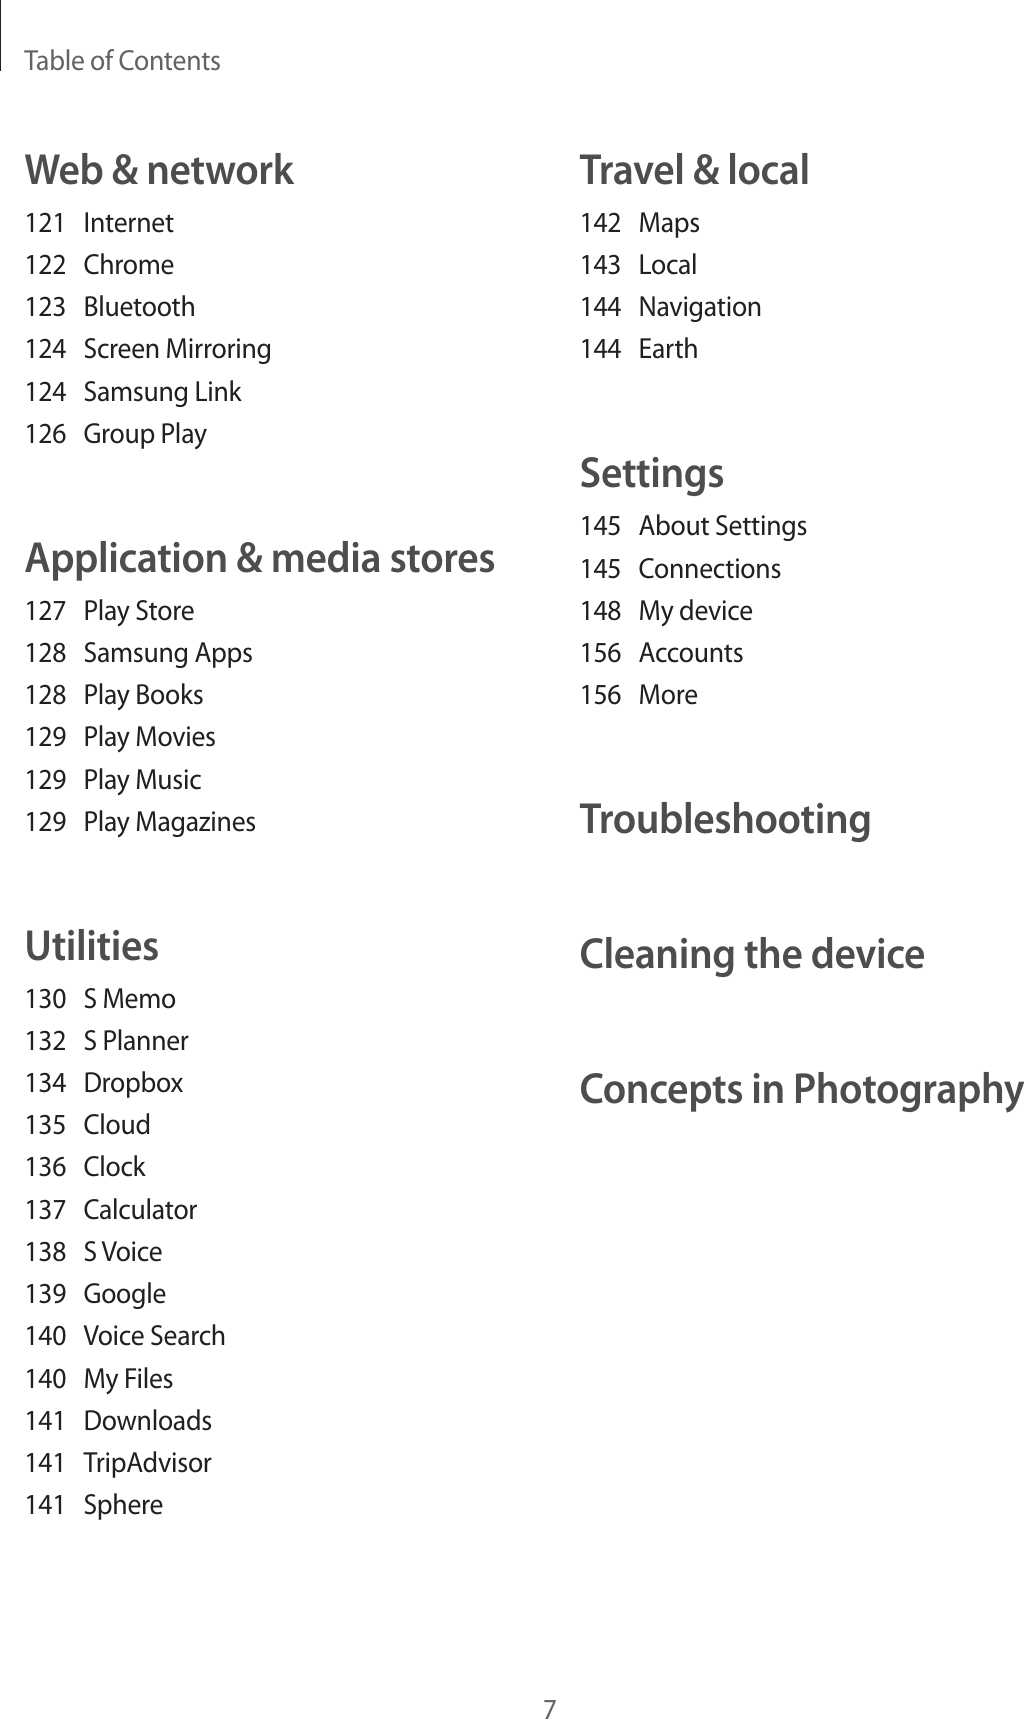 Table of Contents7Travel &amp; local142 Maps143 Local144 Navigation144 EarthSettings145  About Settings145 Connections148  My device156 Accounts156 MoreTroubleshootingCleaning the deviceConcepts in PhotographyWeb &amp; network121 Internet122 Chrome123 Bluetooth124  Screen Mirroring124  Samsung Link126  Group PlayApplication &amp; media stores127  Play Store128  Samsung Apps128  Play Books129  Play Movies129  Play Music129  Play MagazinesUtilities130  S Memo132  S Planner134 Dropbox135 Cloud136 Clock137 Calculator138  S Voice139 Google140  Voice Search140  My Files141 Downloads141 TripAdvisor141 Sphere